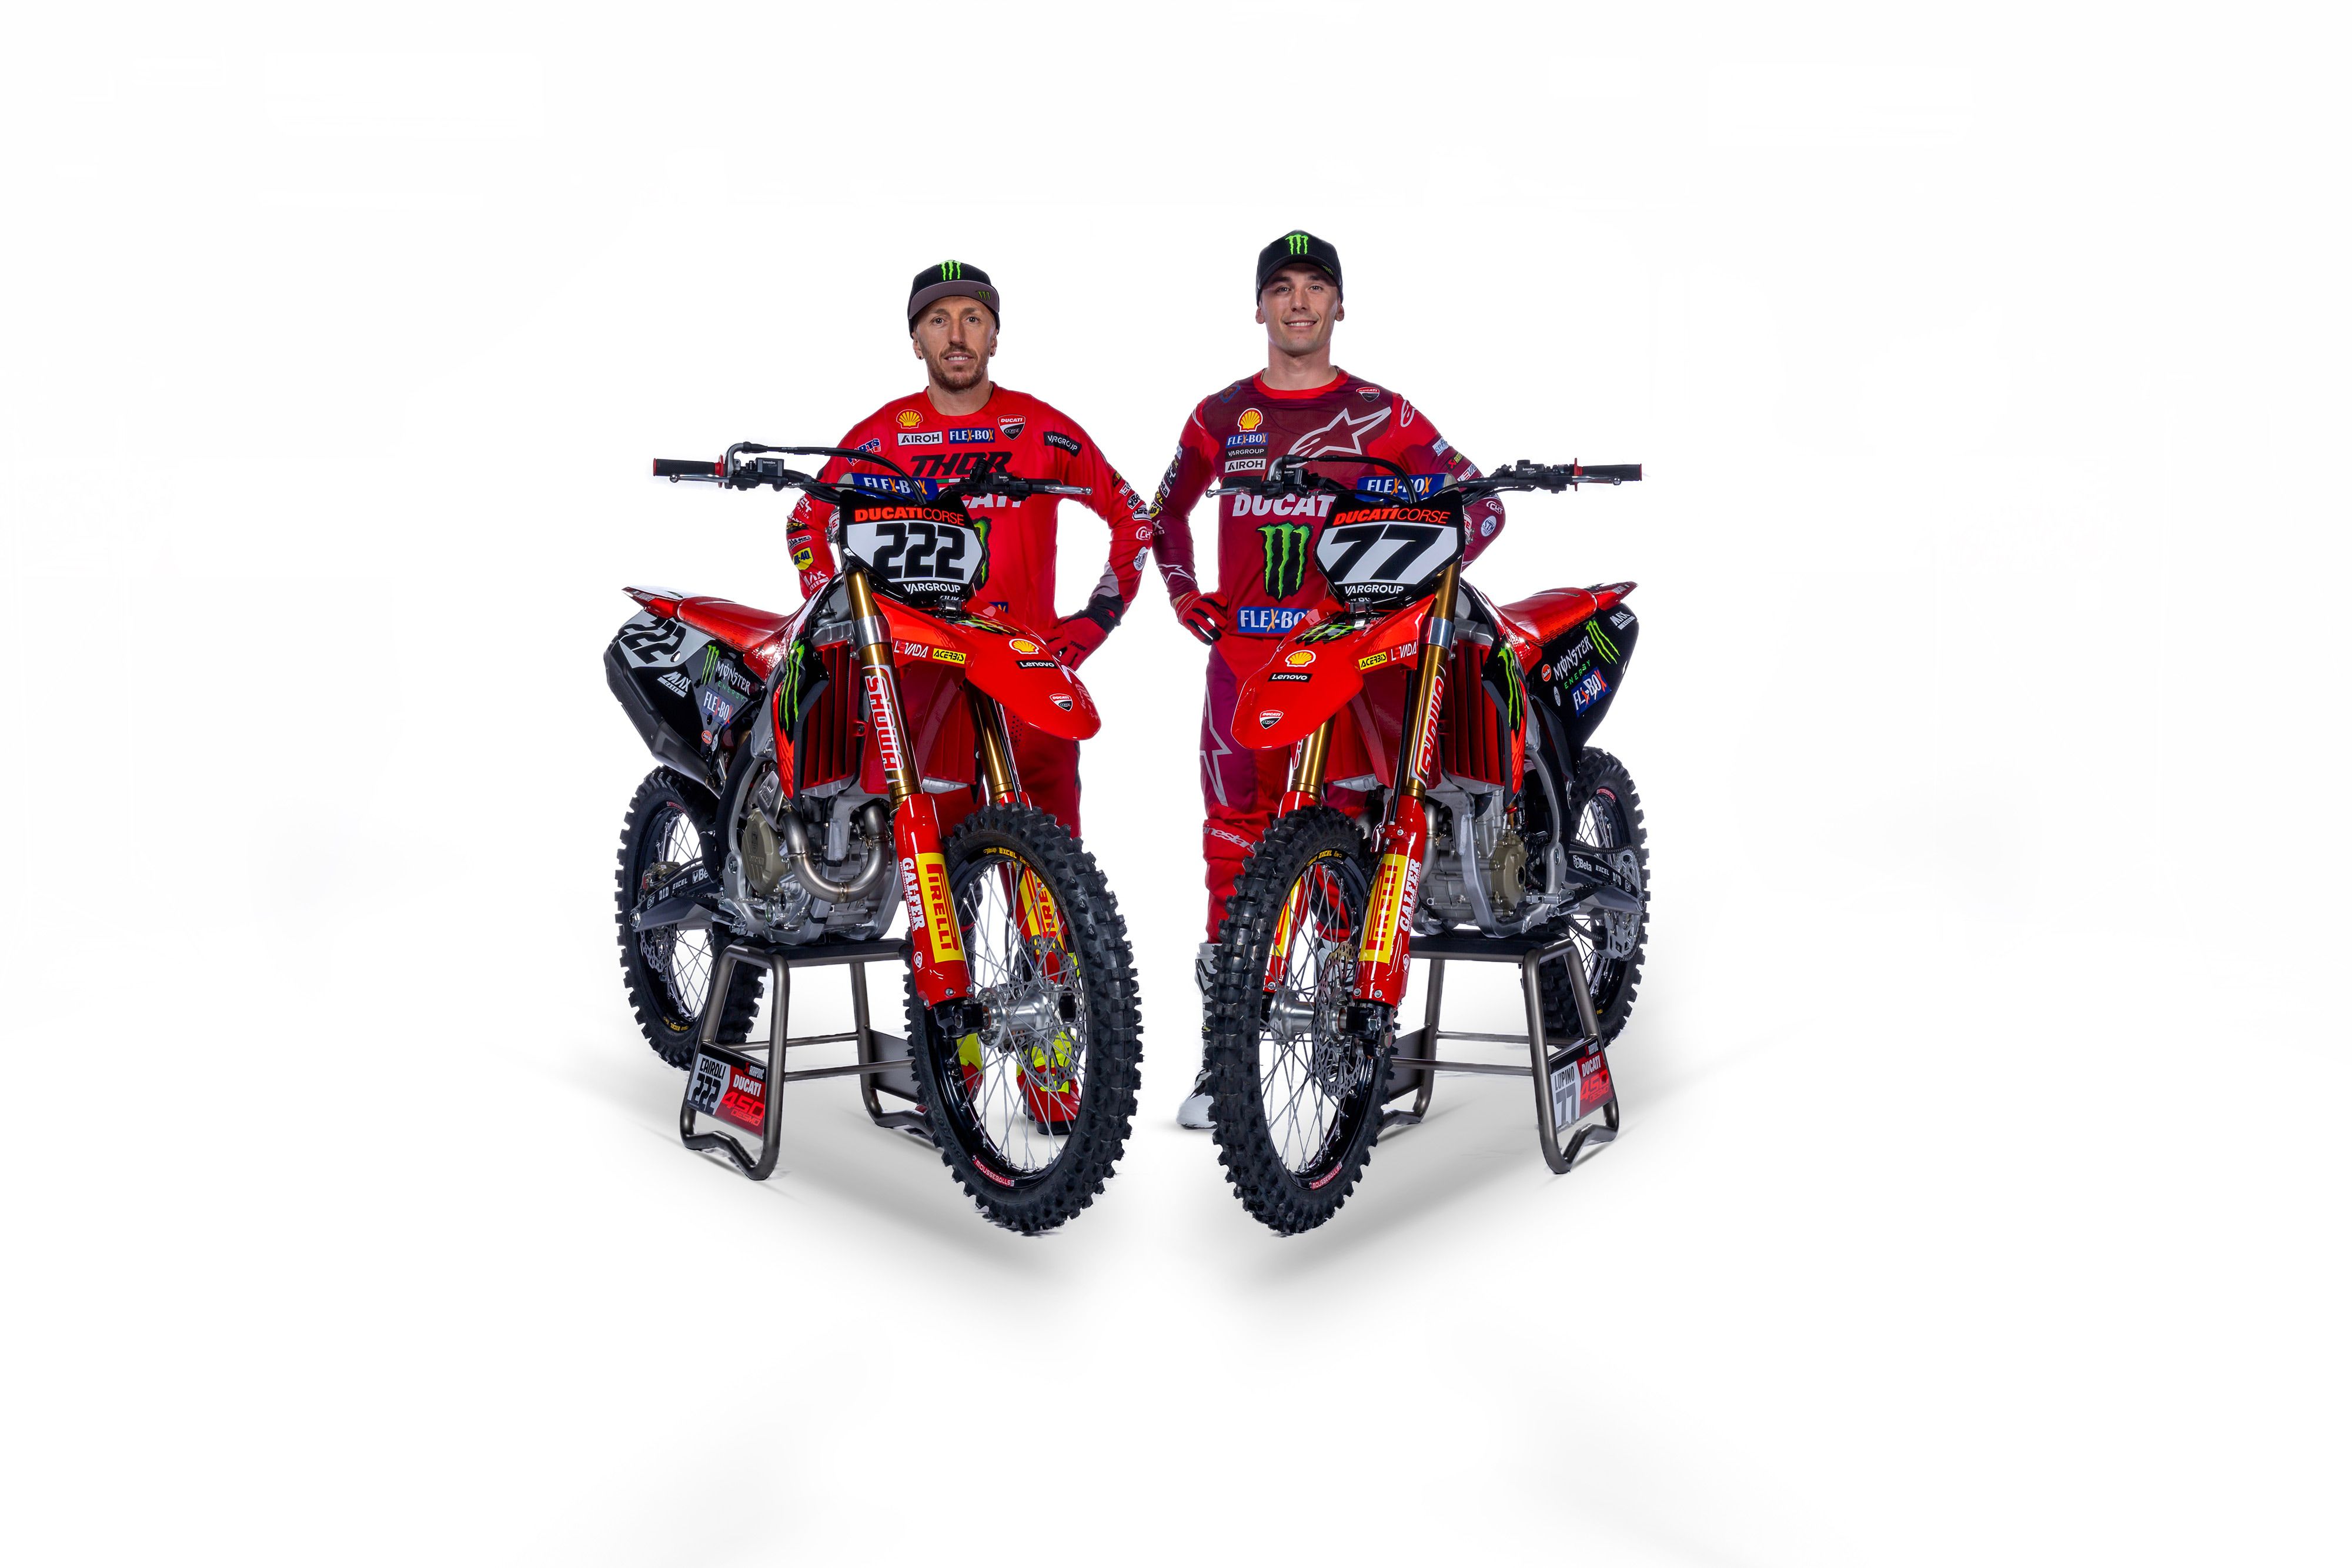 Tony Cairoli and Alessandro Lupino will race the all-new Ducati Desmo450 MX this year in Italy. Ducati photo